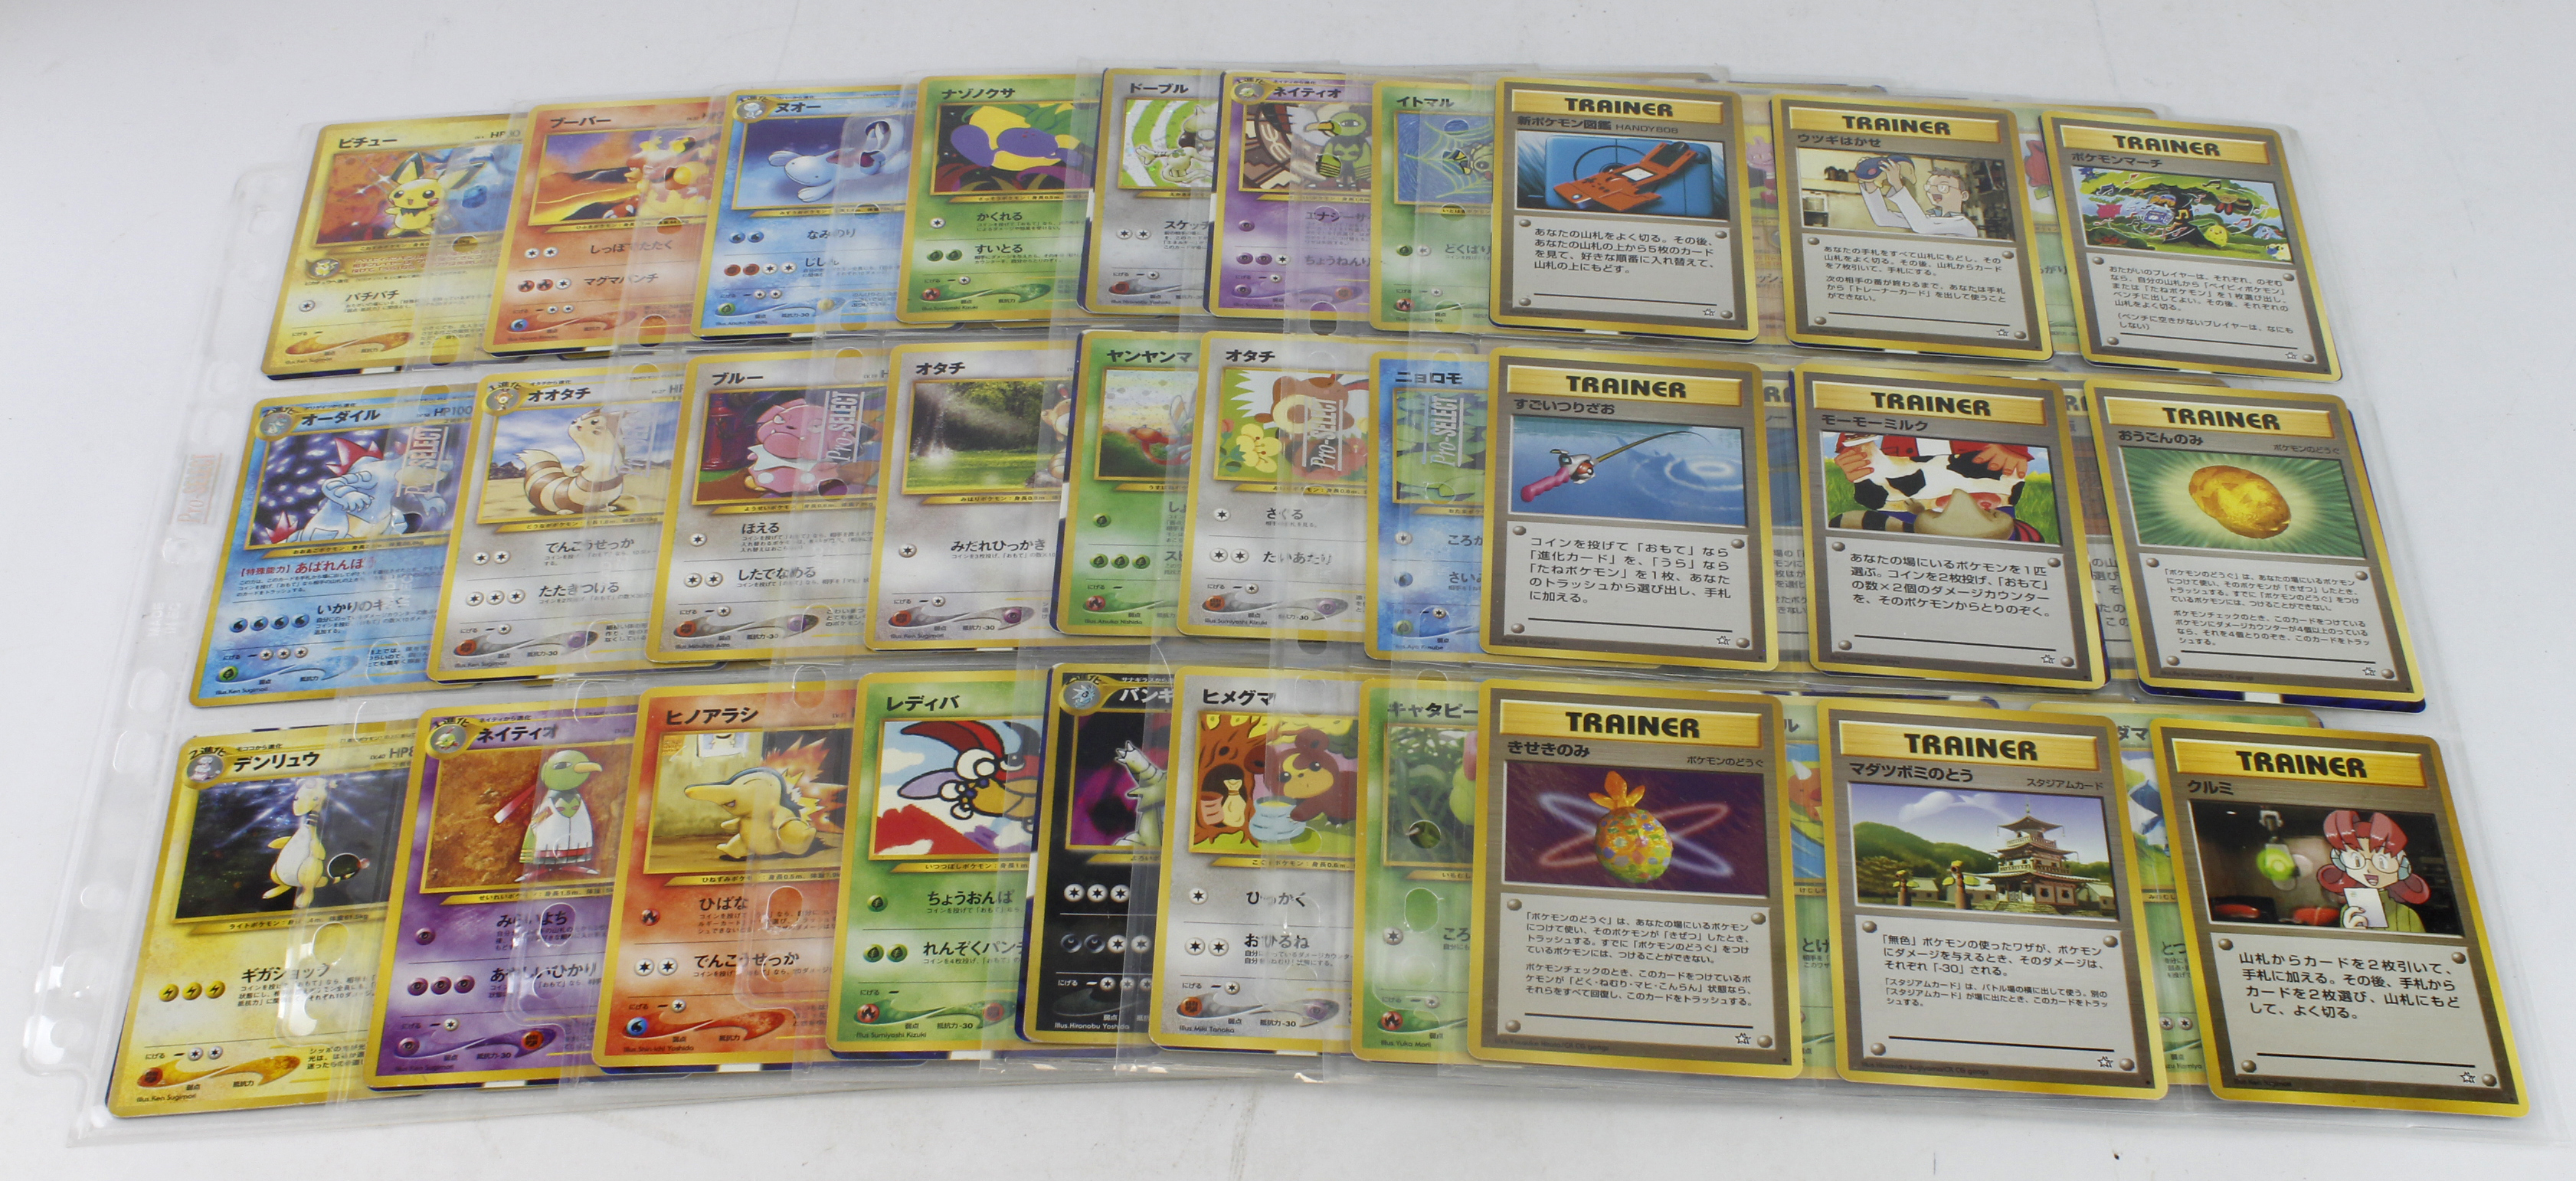 Pokemon. A collection of approximately 135 mixed Japanese Pokemon cards (incl. Neo 1 & 2, Jungle,